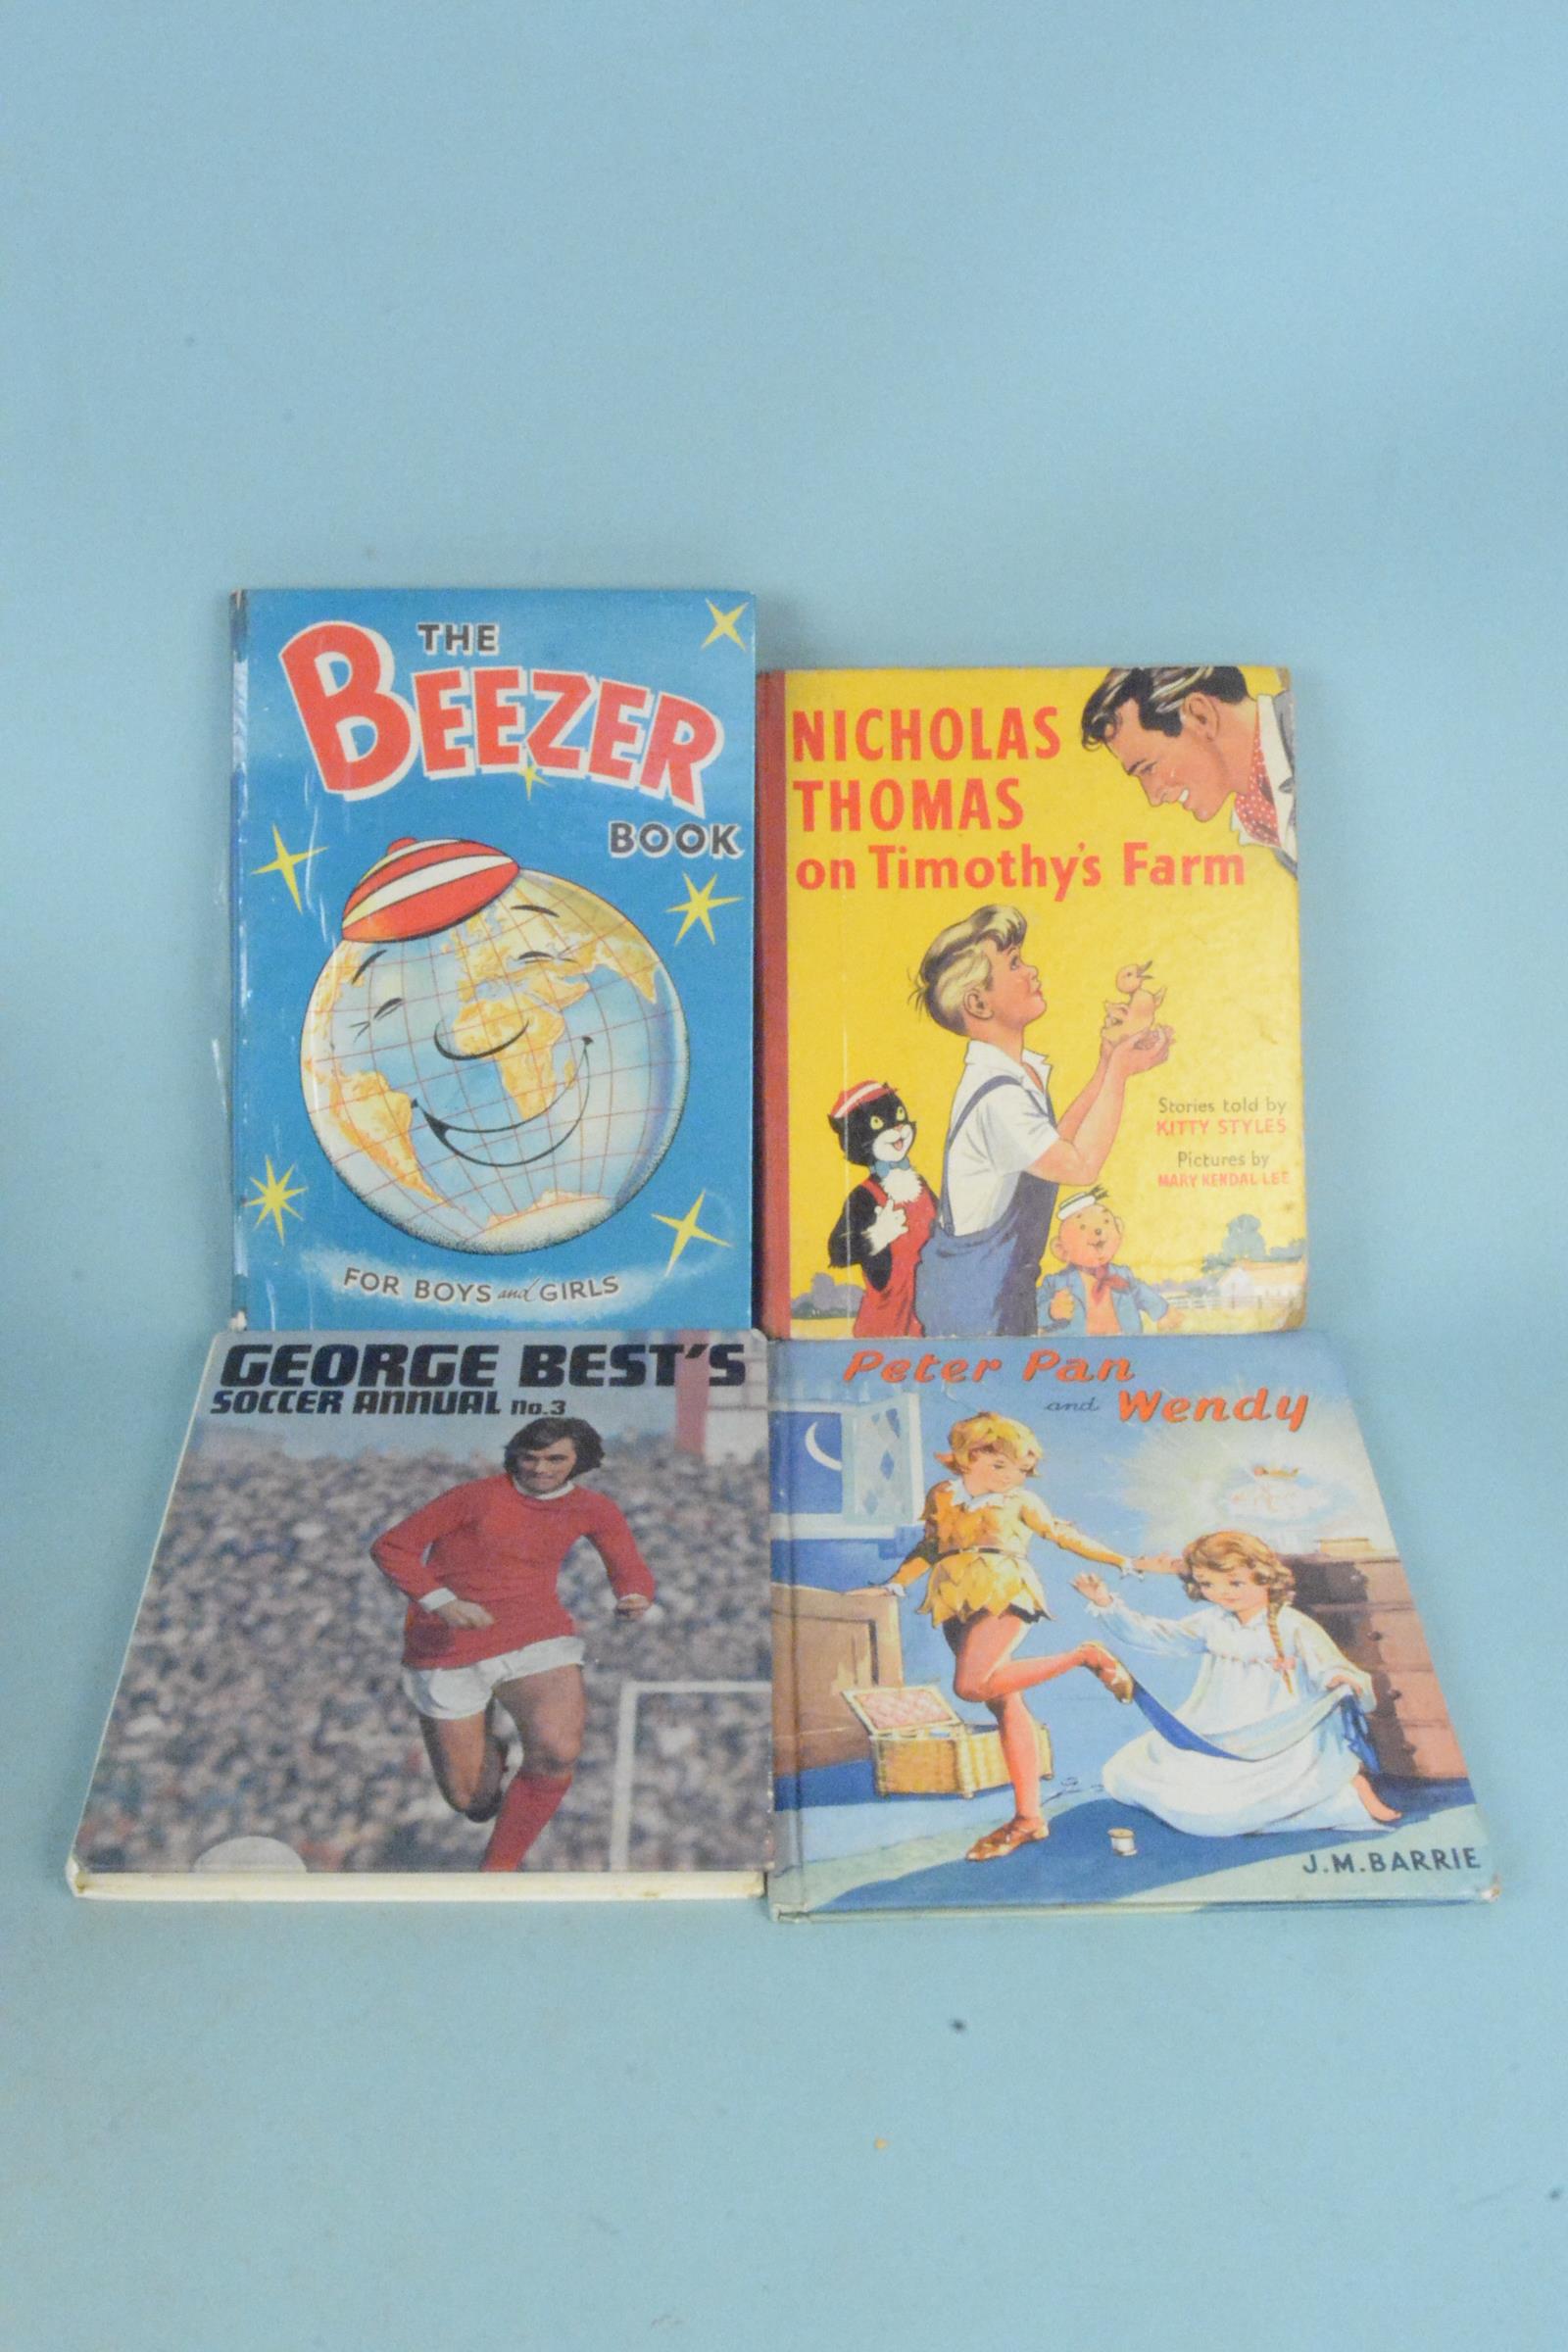 A selection of vintage Rupert annuals and booklets, four George Best soccer annuals, - Image 2 of 7